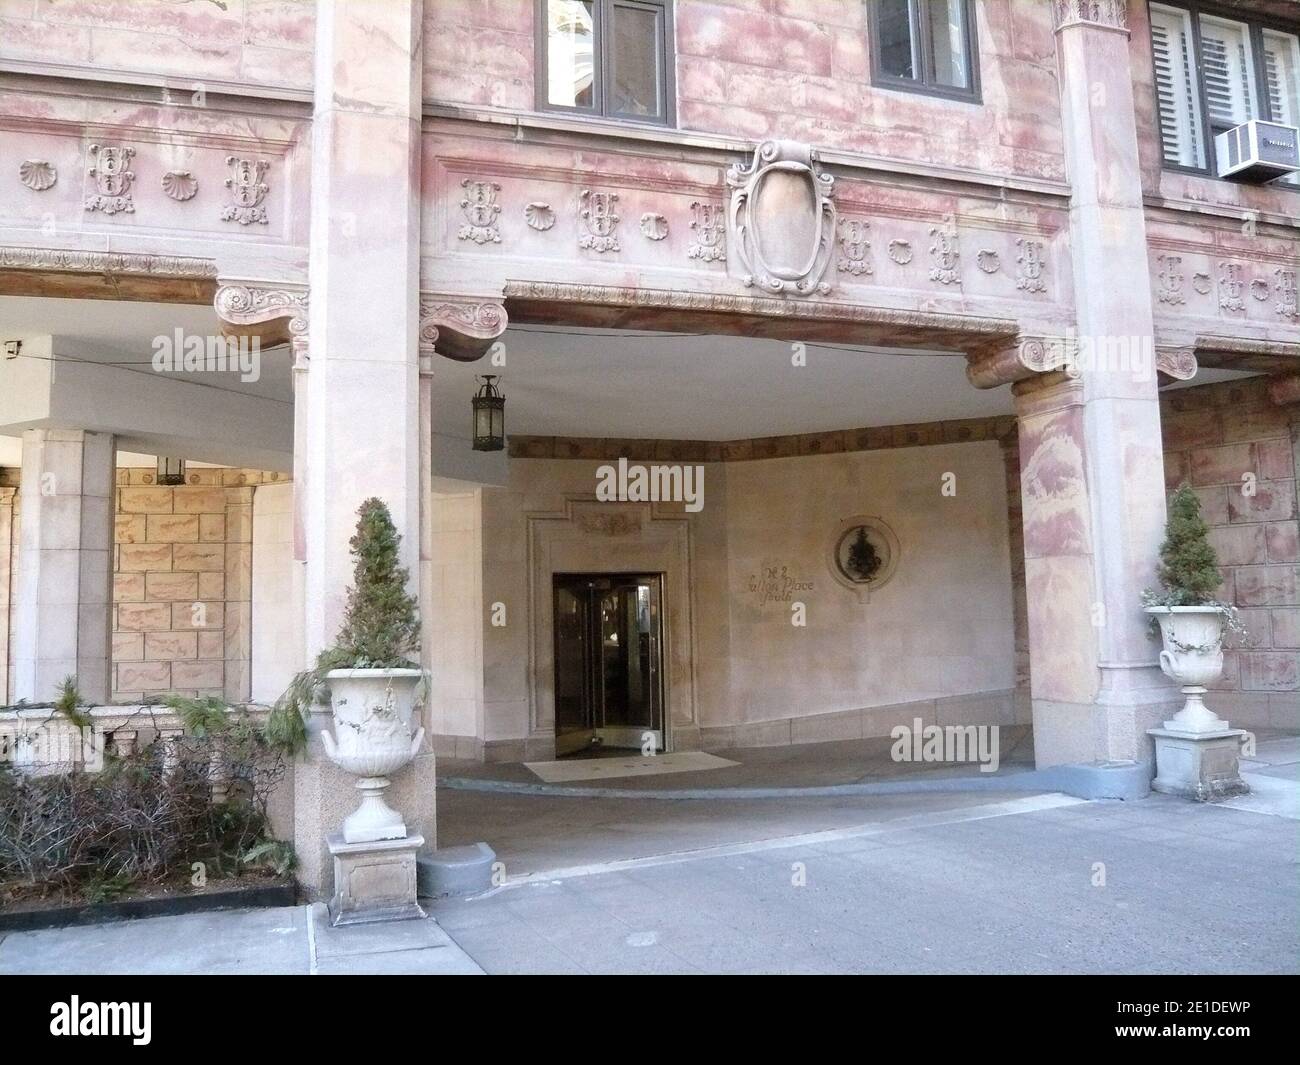 https://c8.alamy.com/comp/2E1DEWP/icon-marilyn-monroes-spots-around-manhattan-in-new-york-ny-on-january-12-2011marilyn-rented-an-apartment-in-this-building-at-2-sutton-place-in-the-upper-east-sidemarilyn-lived-in-new-york-on-and-off-until-just-before-her-death-in-1962-photo-by-charles-guerinabacausacom-2E1DEWP.jpg